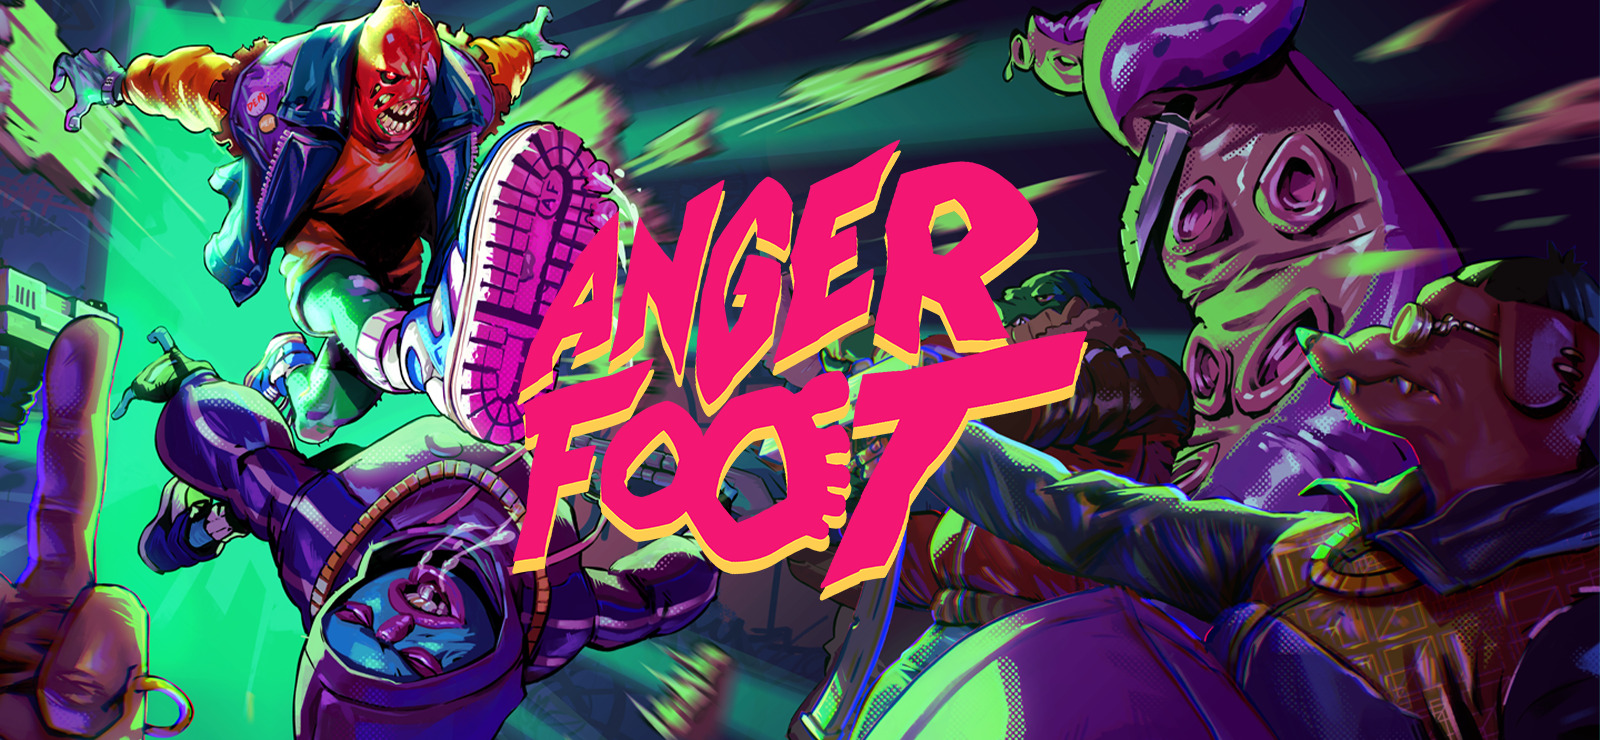 download anger foot game download